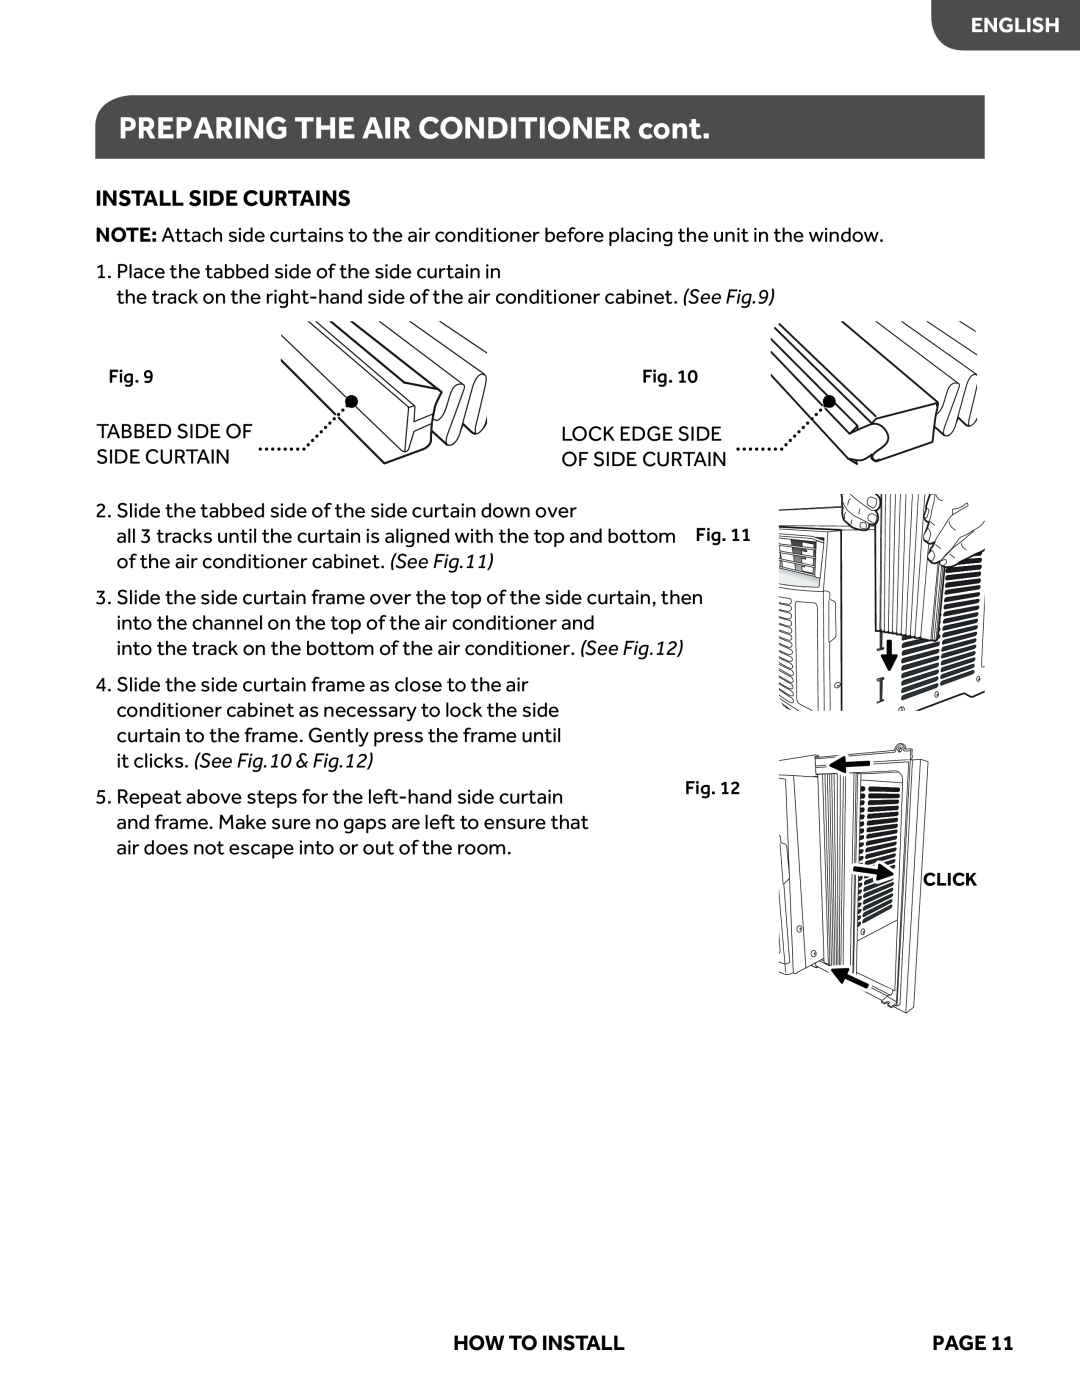 Haier HWE12XCN, HWE10XCN, HWE08XCN, HWE06XCN user manual PREPARING THE AIR CONDITIONER cont, Install Side Curtains, English 